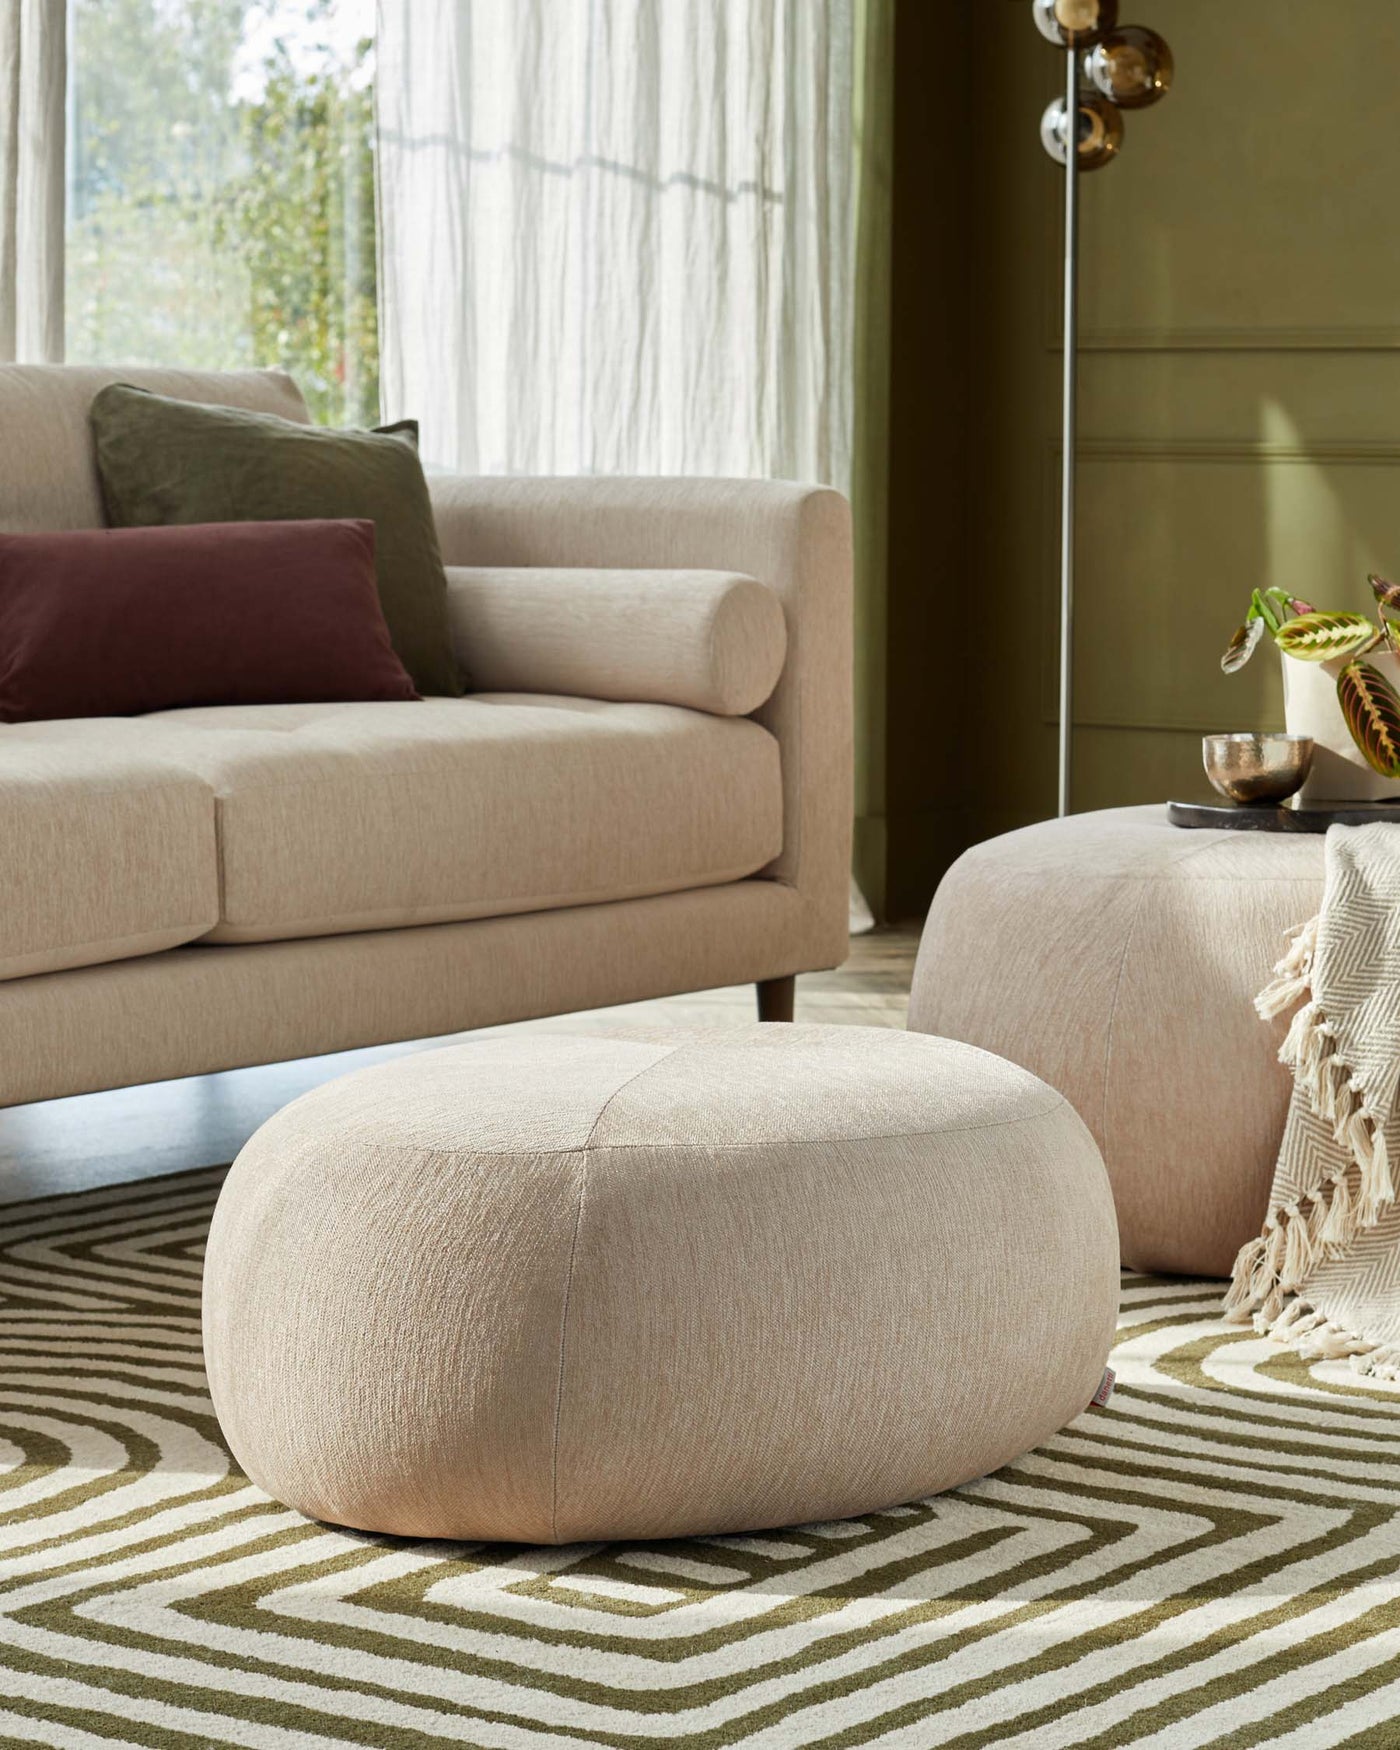 Contemporary beige sofa with plush cushions and clean lines, complemented by two round, fabric-upholstered ottomans in a matching hue, all set upon a geometric-patterned area rug in earth tones.